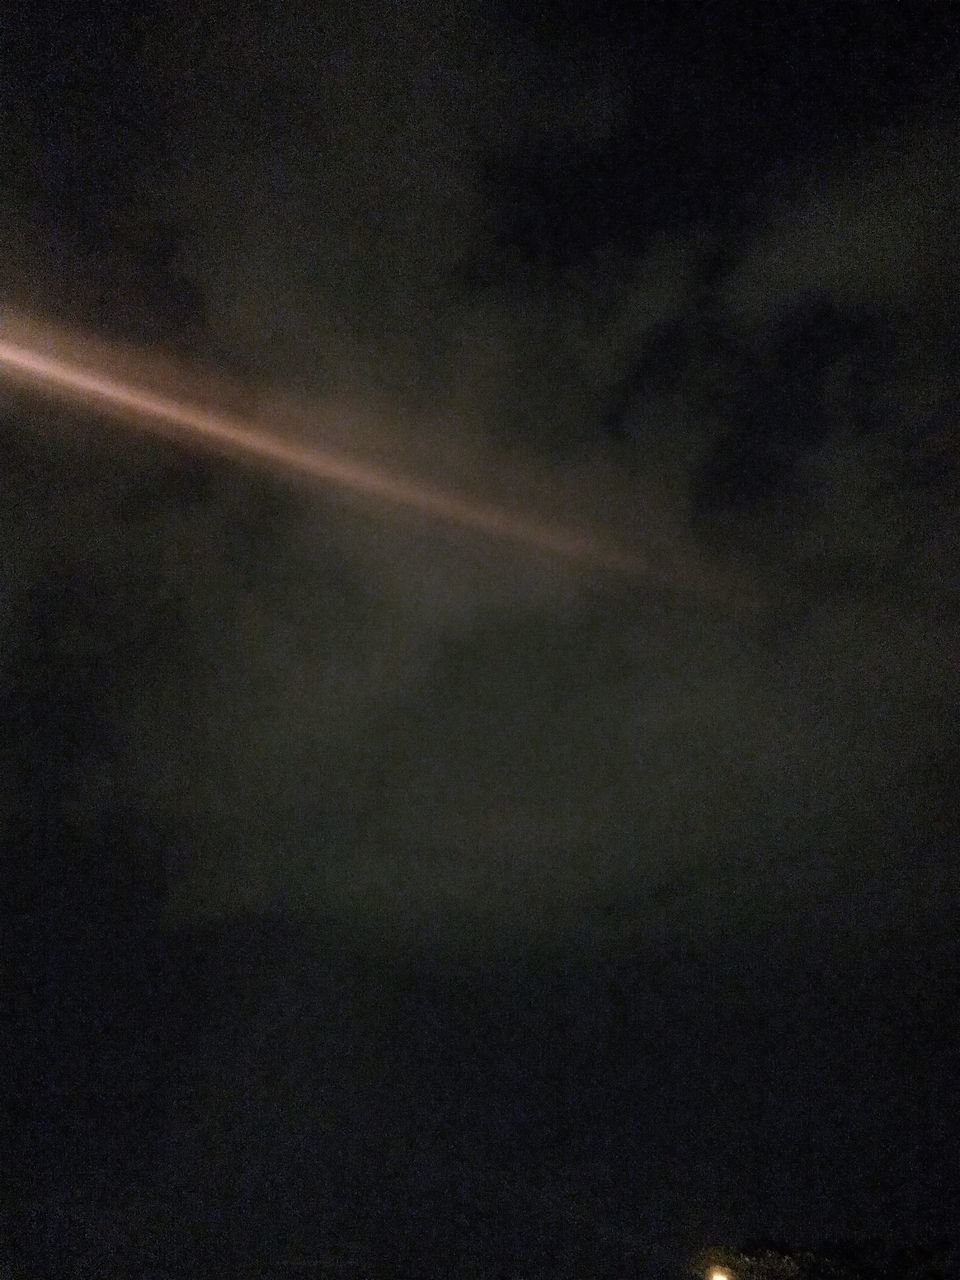 LOW ANGLE VIEW OF VAPOR TRAIL IN SKY AT NIGHT